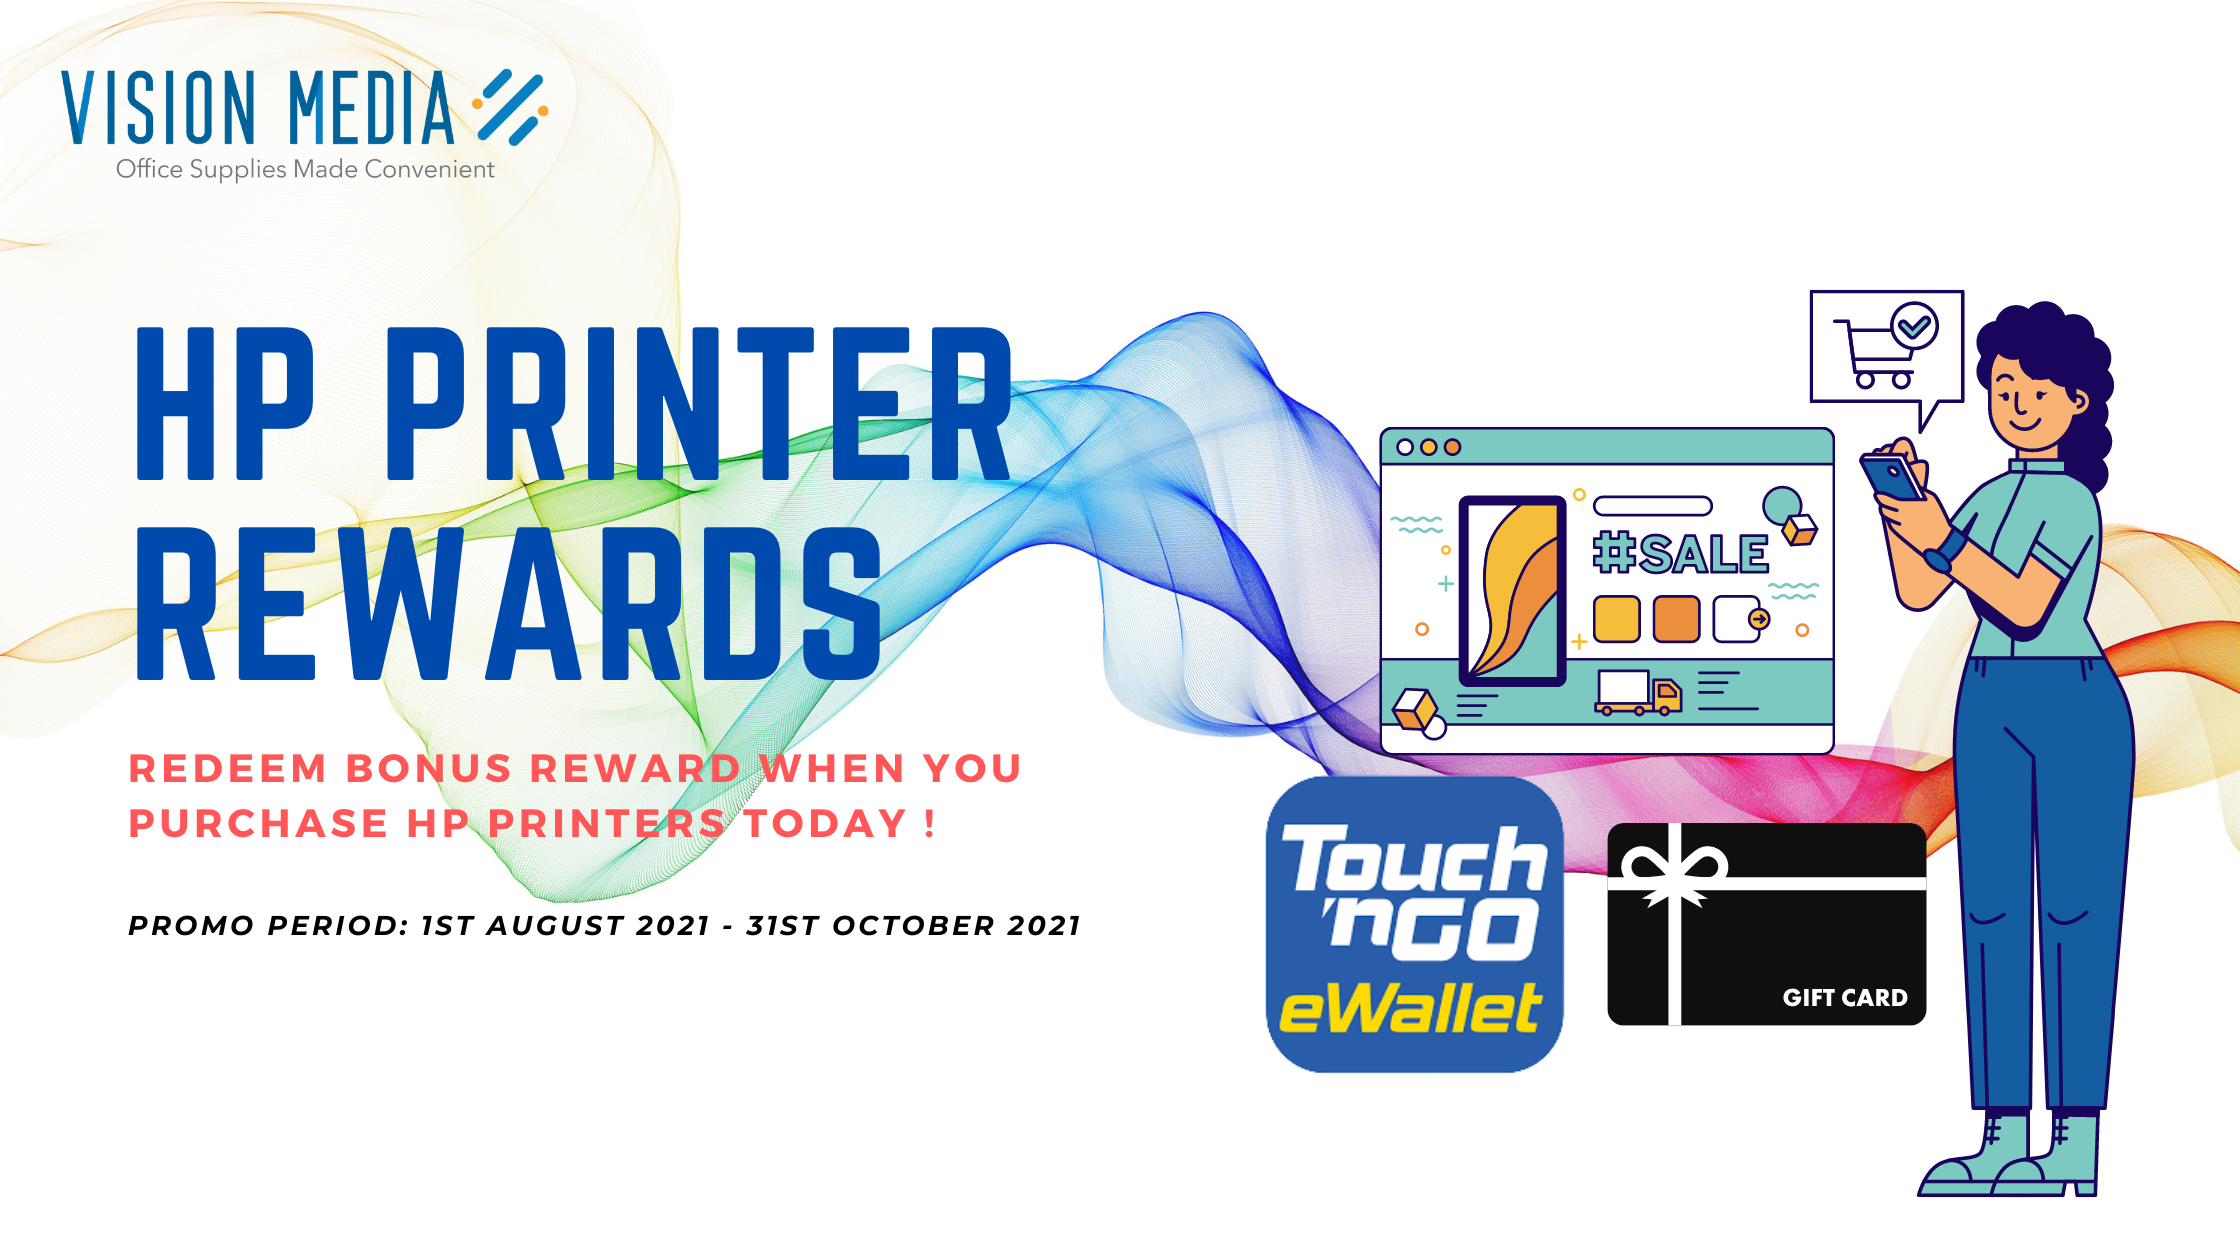 HP PRINTER REWARDS. Free RM80 TnG credit with selected printer purchases !